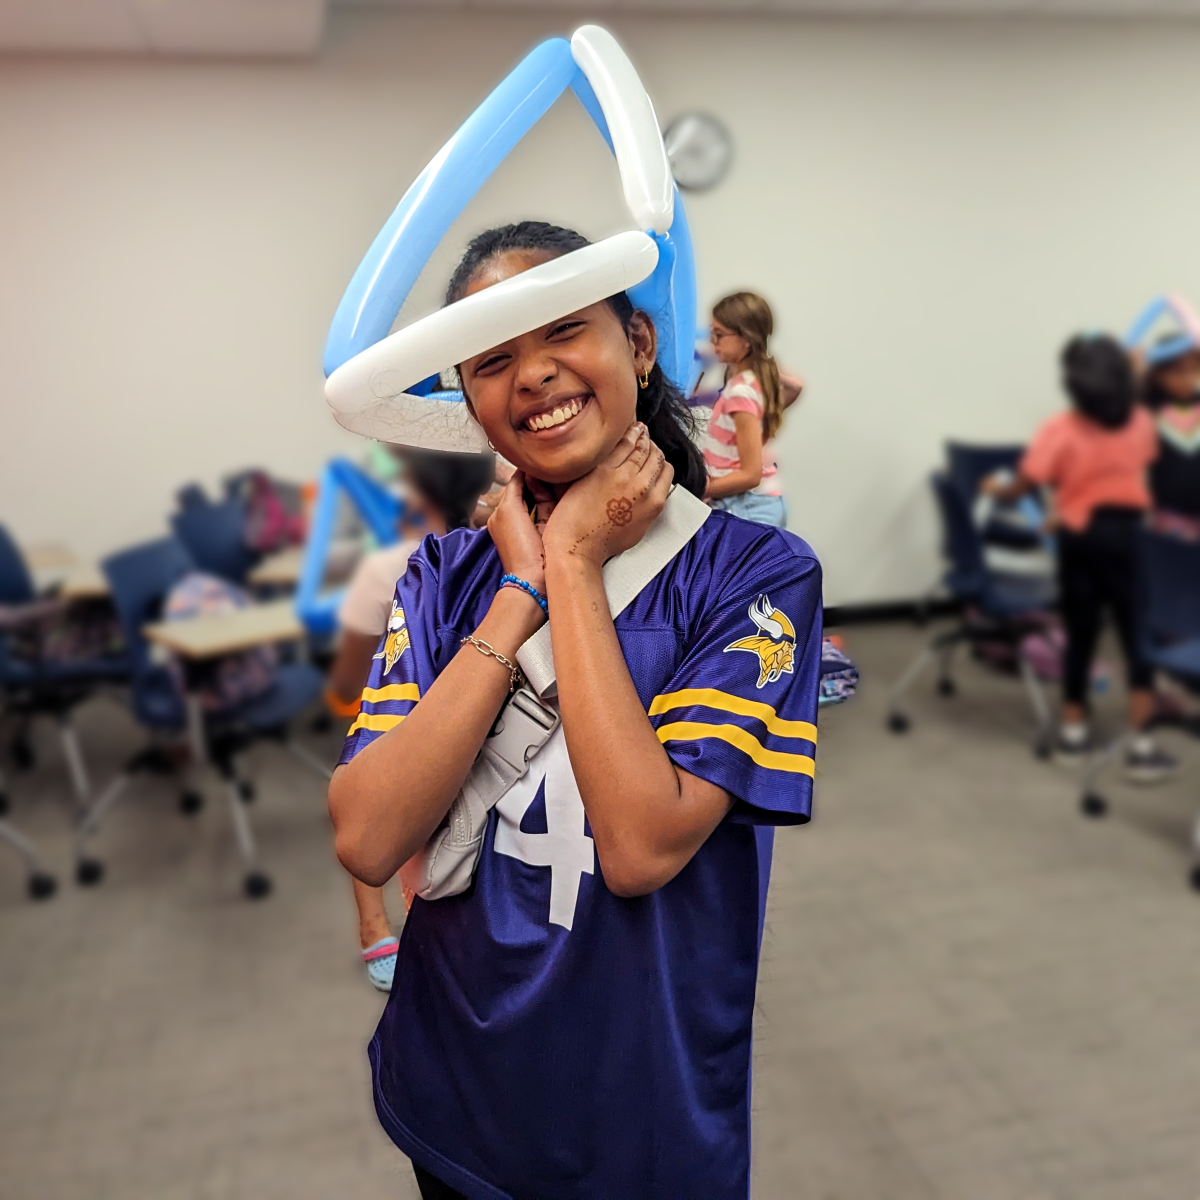 Student wearing a pyramid shaped balloon hat